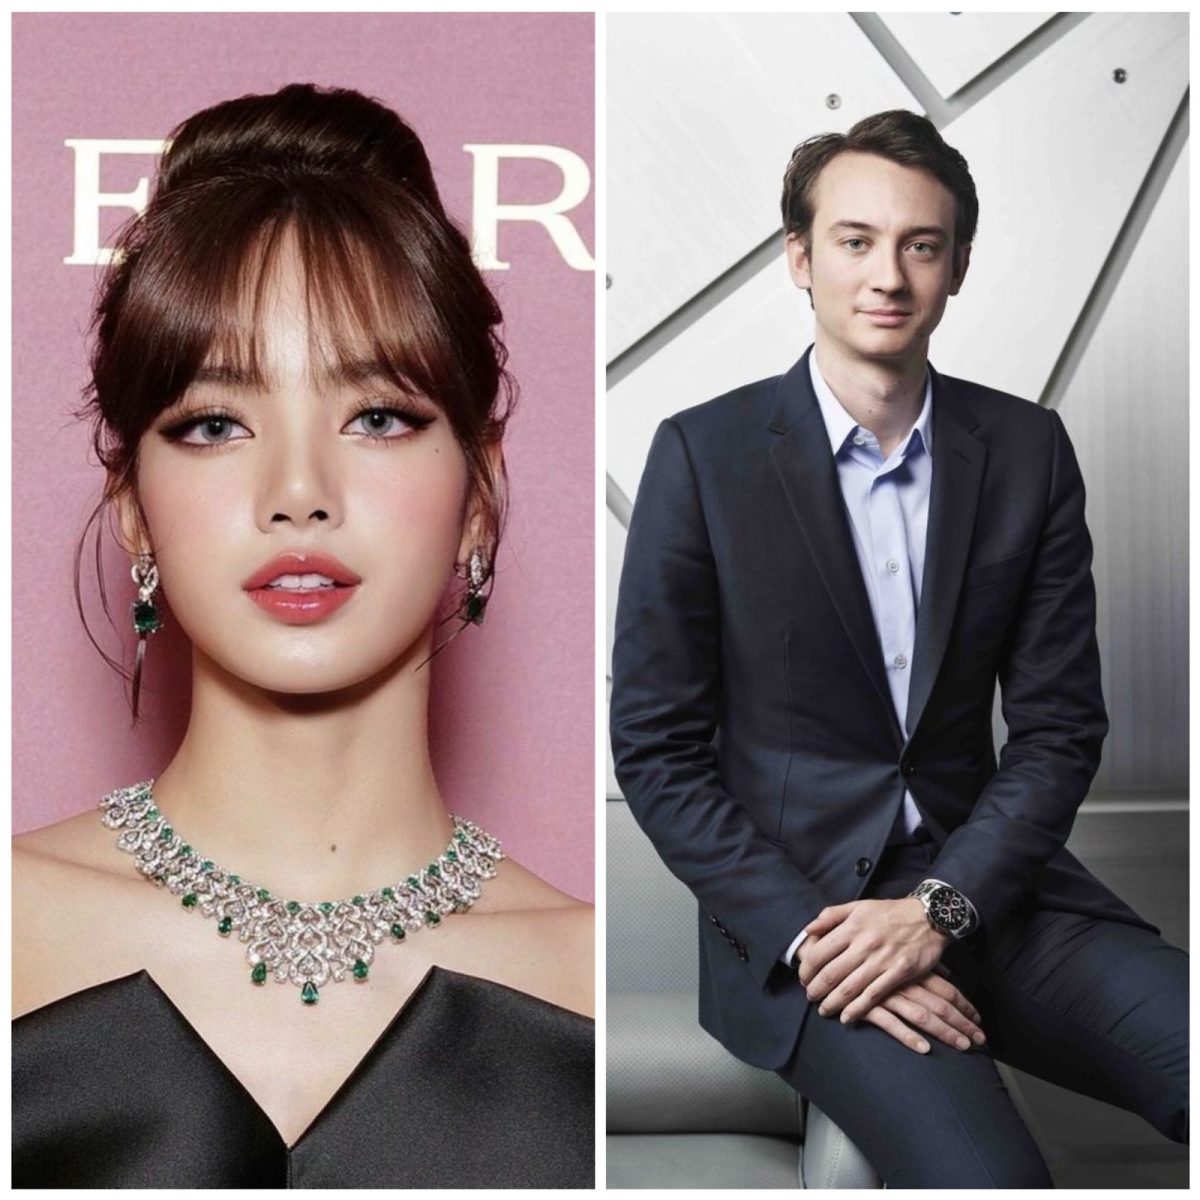 The picture on the left shows Blackpinks Lisa attending the Bulgari festival and on the right Frédéric Arnault at his company TAG Heuer. 